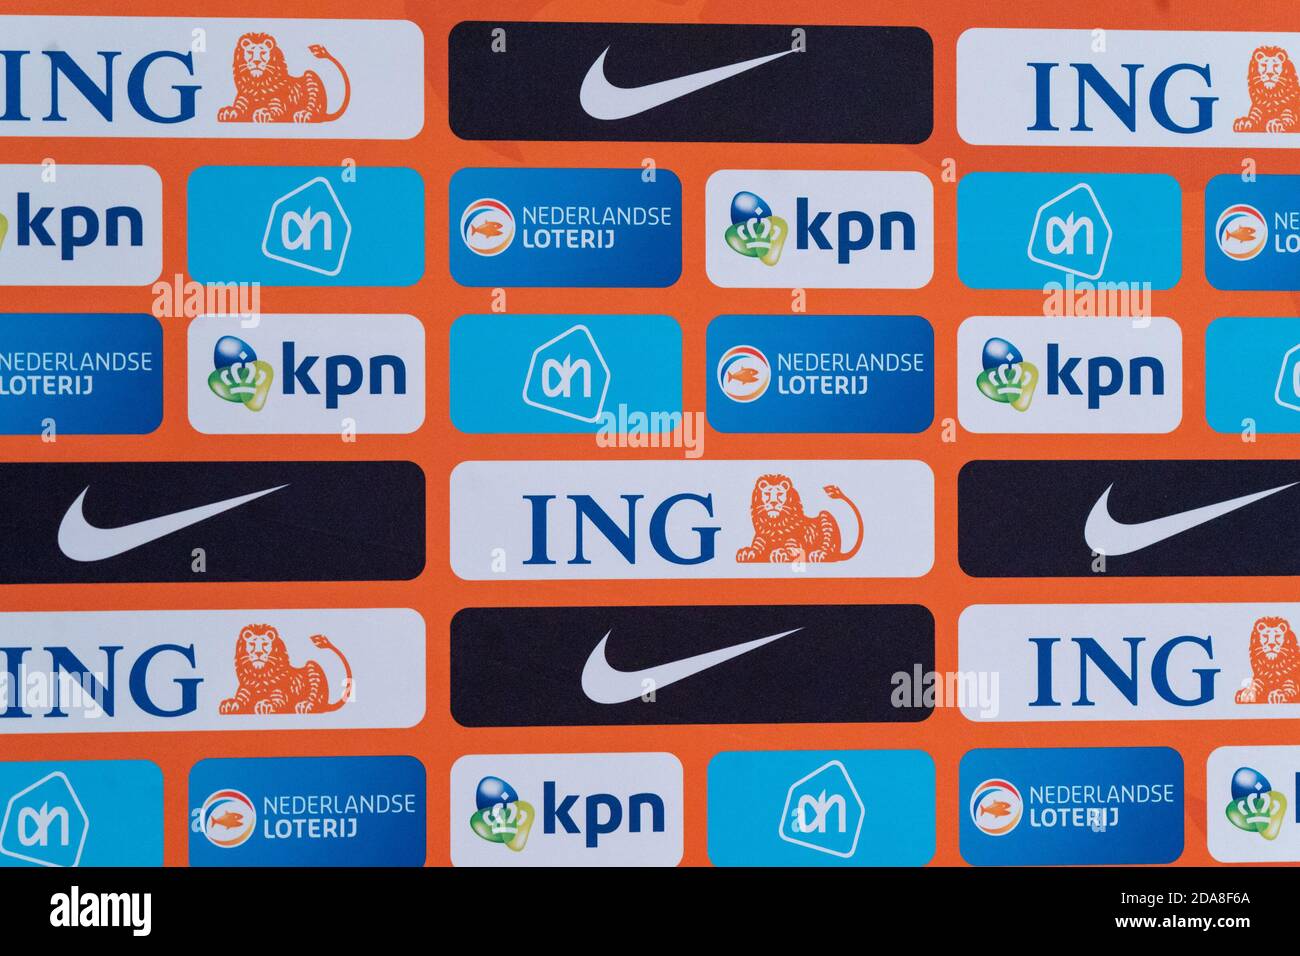 ZEIST, NETHERLANDS - NOVEMBER 10: Commercial Banners / background / panel /  ING, KPN, AH, Nike, Nederlandse Loterij during the press conference of The  Netherlands prior to the match against Spain at